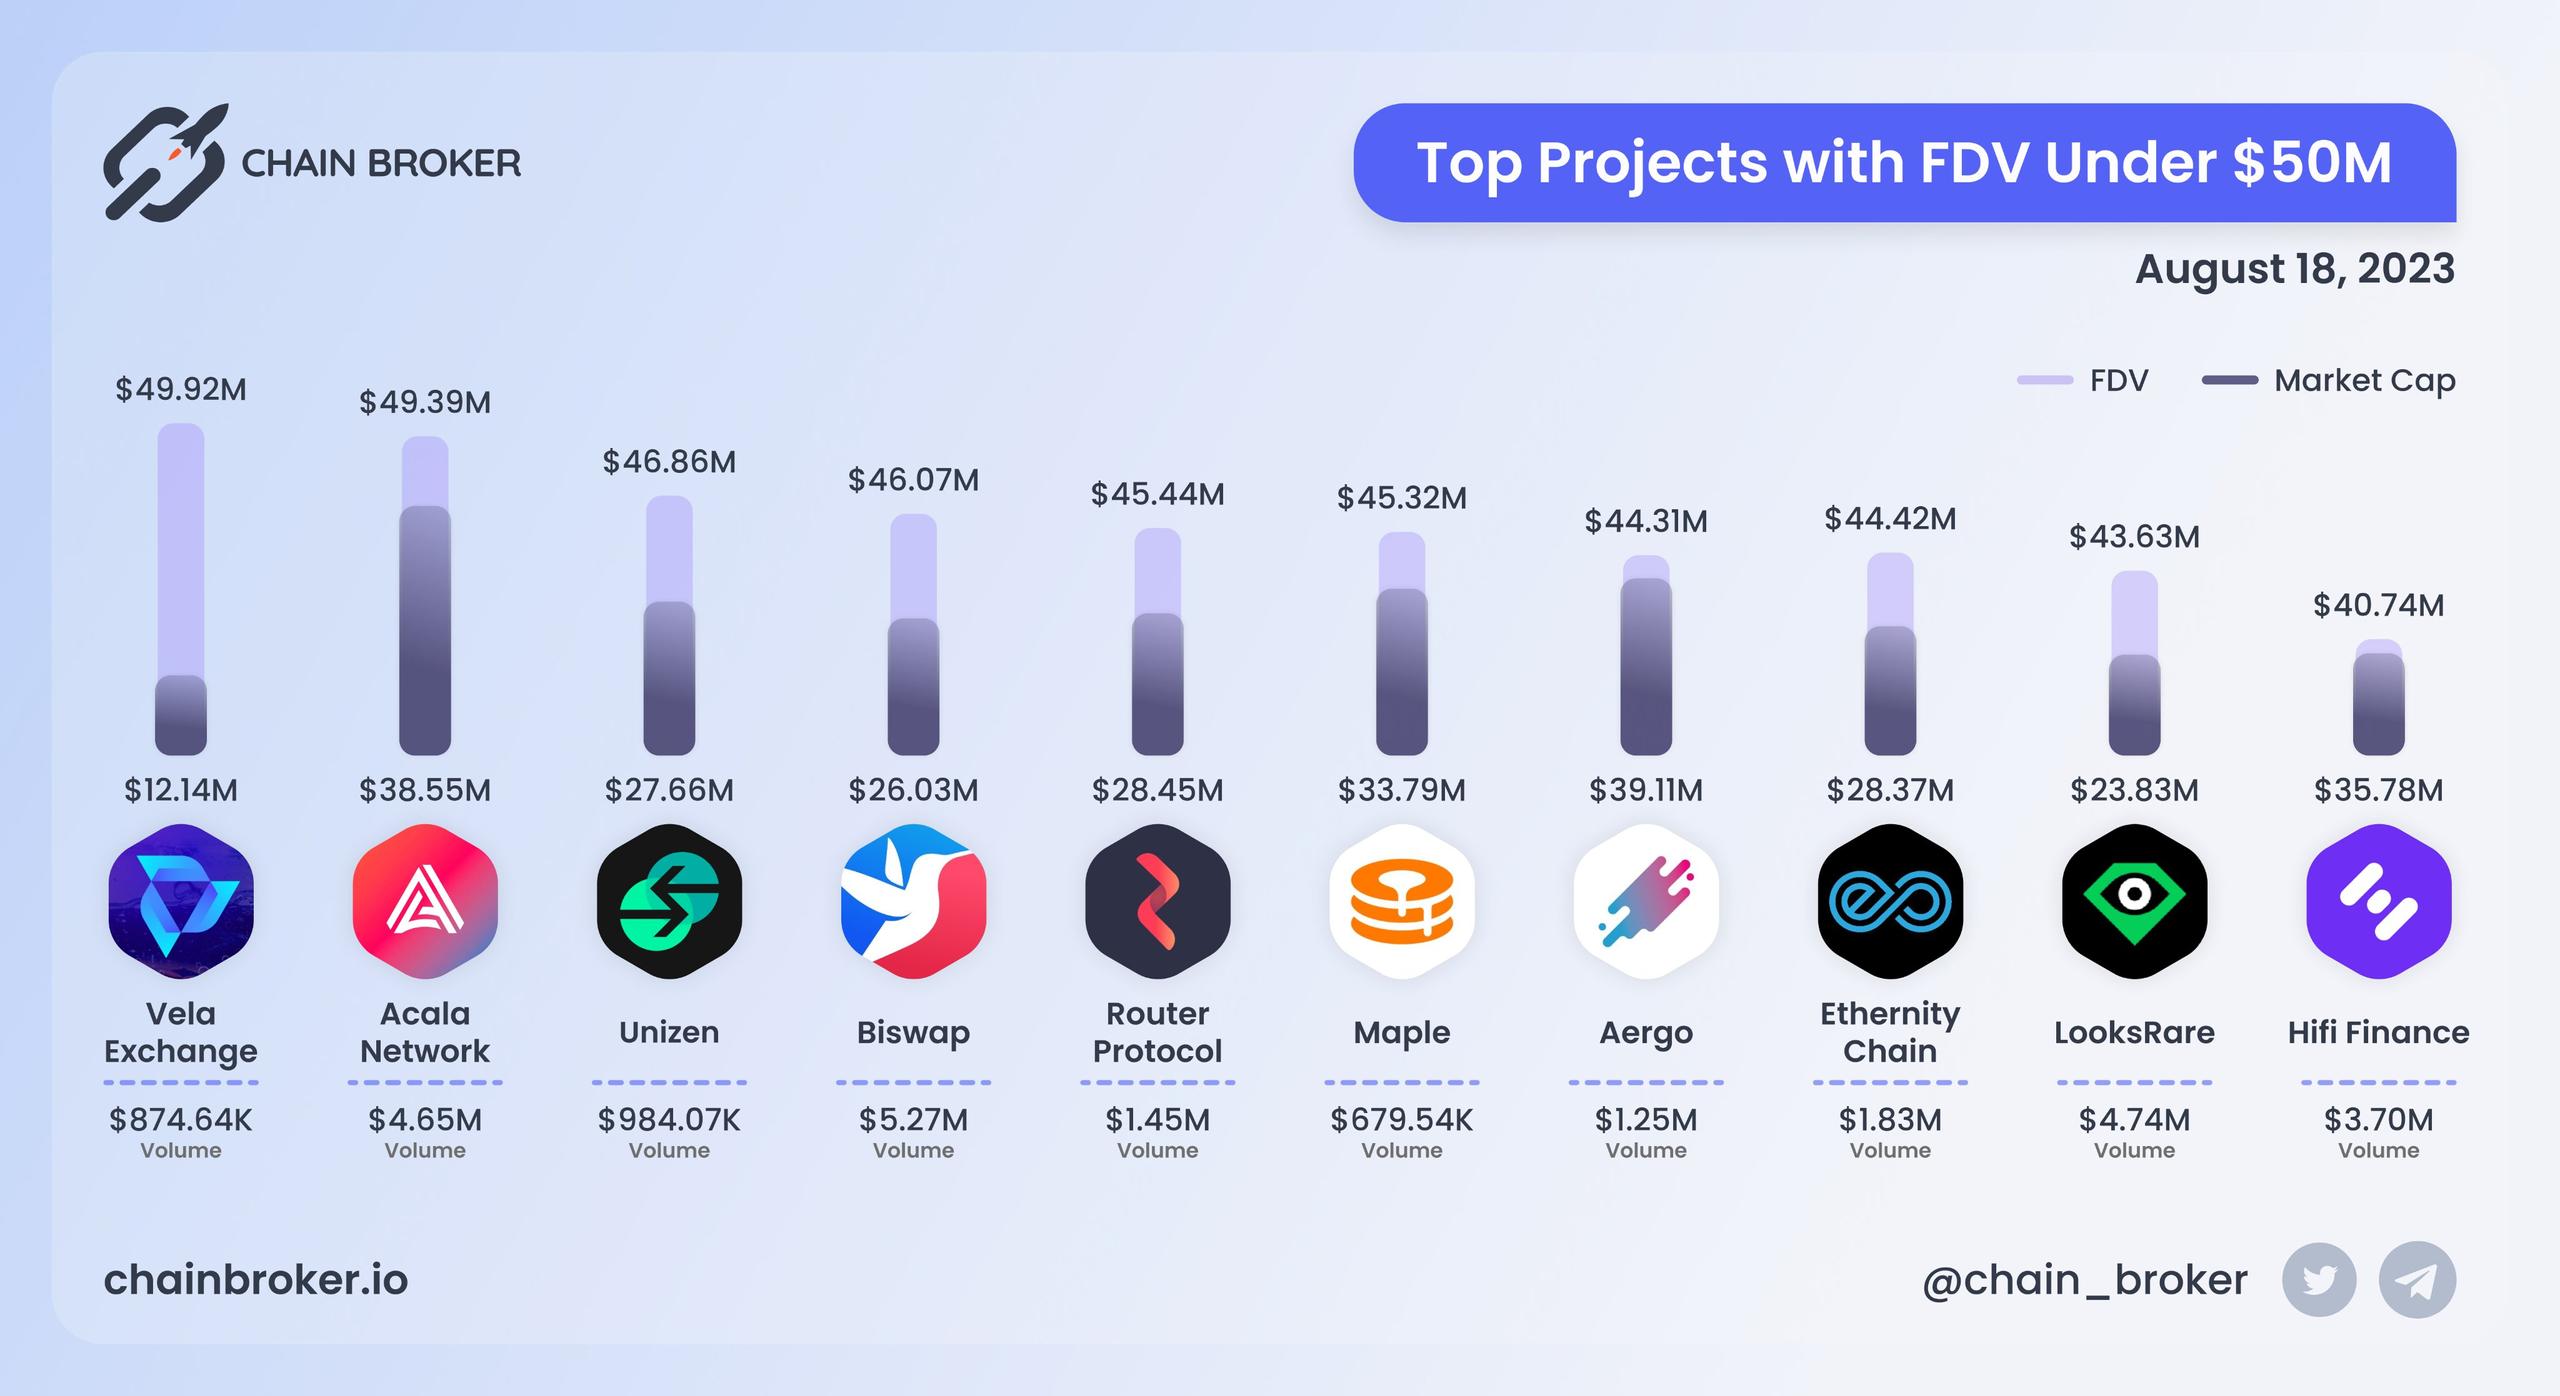 Top projects with FDV under $50M